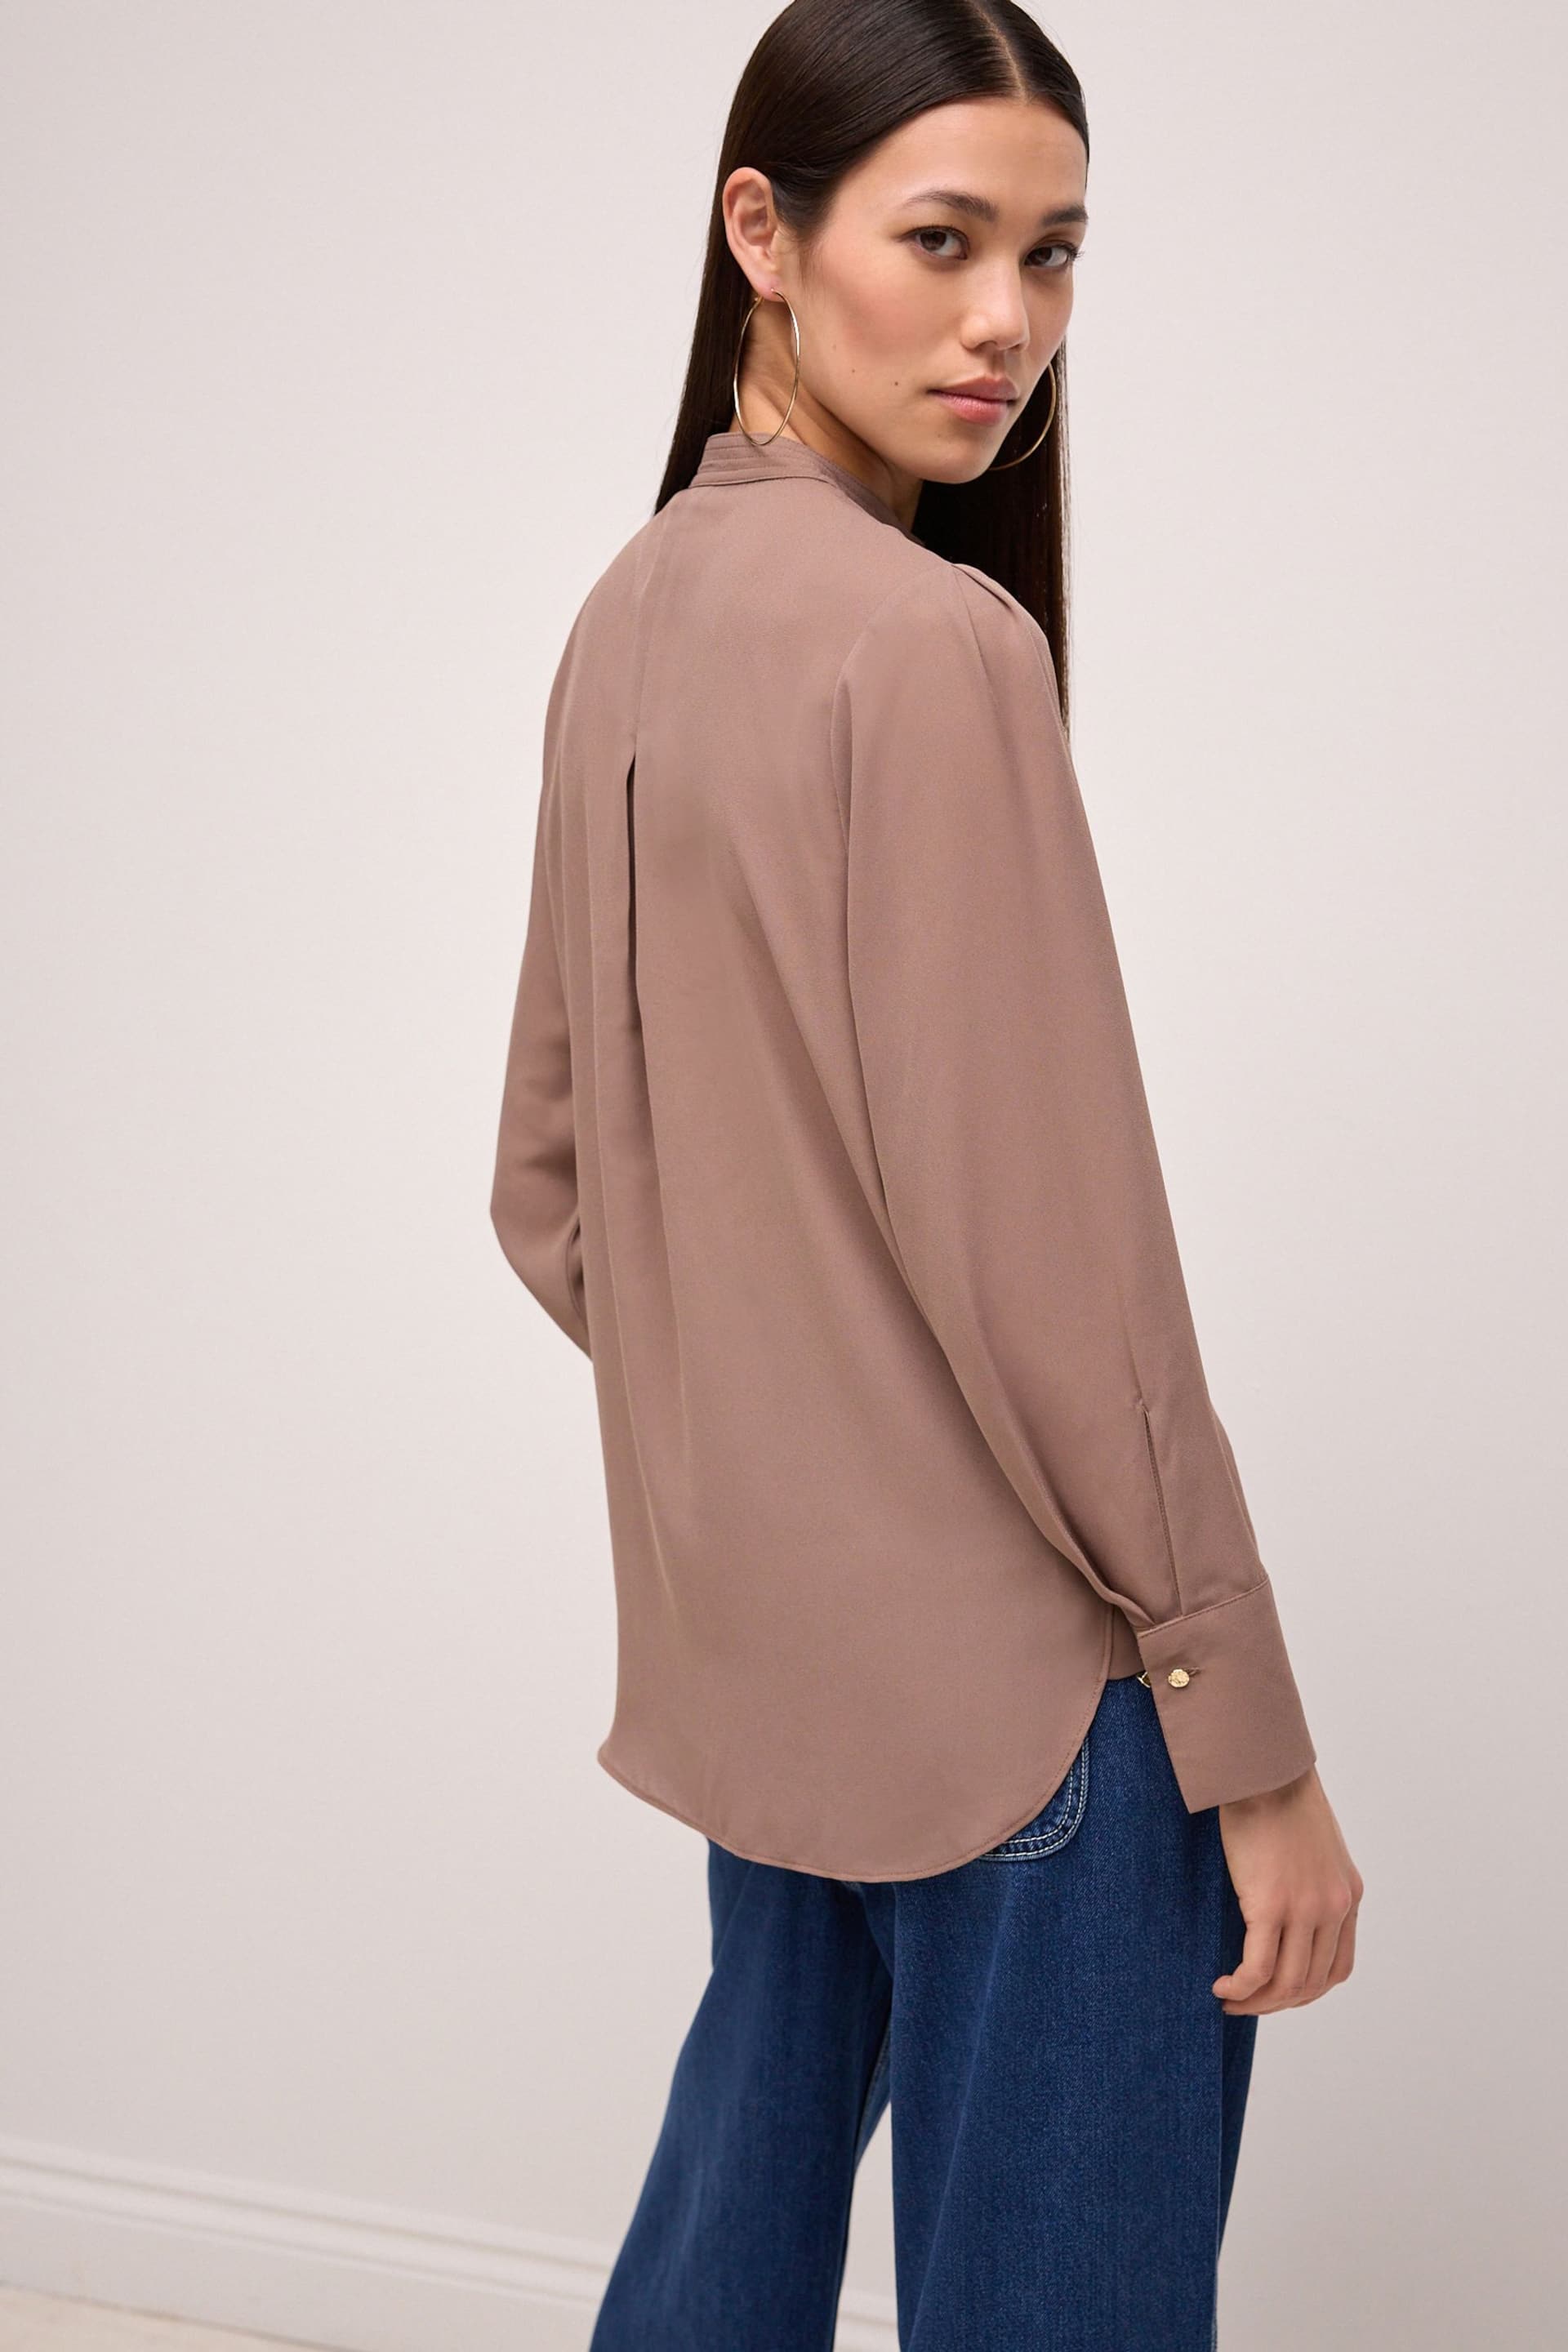 Taupe Long Sleeve Overhead V-Neck Relaxed Fit Blouse - Image 3 of 6